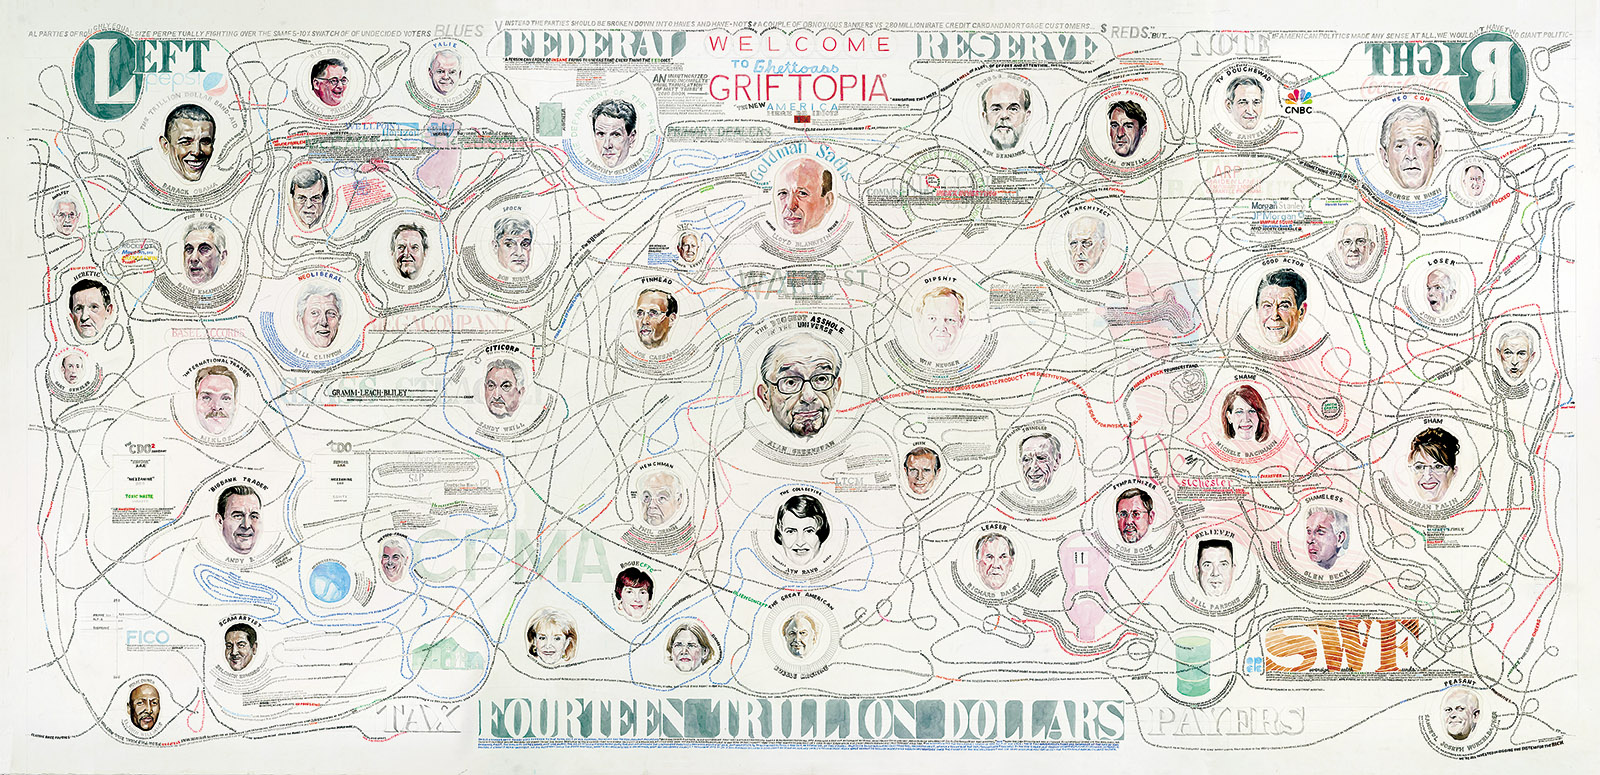 William Powhida: Griftopia, 2011; a ten-foot-wide ‘visual translation’ of the 2008 financial crisis based on Matt Taibbi’s 2010 book of the same title